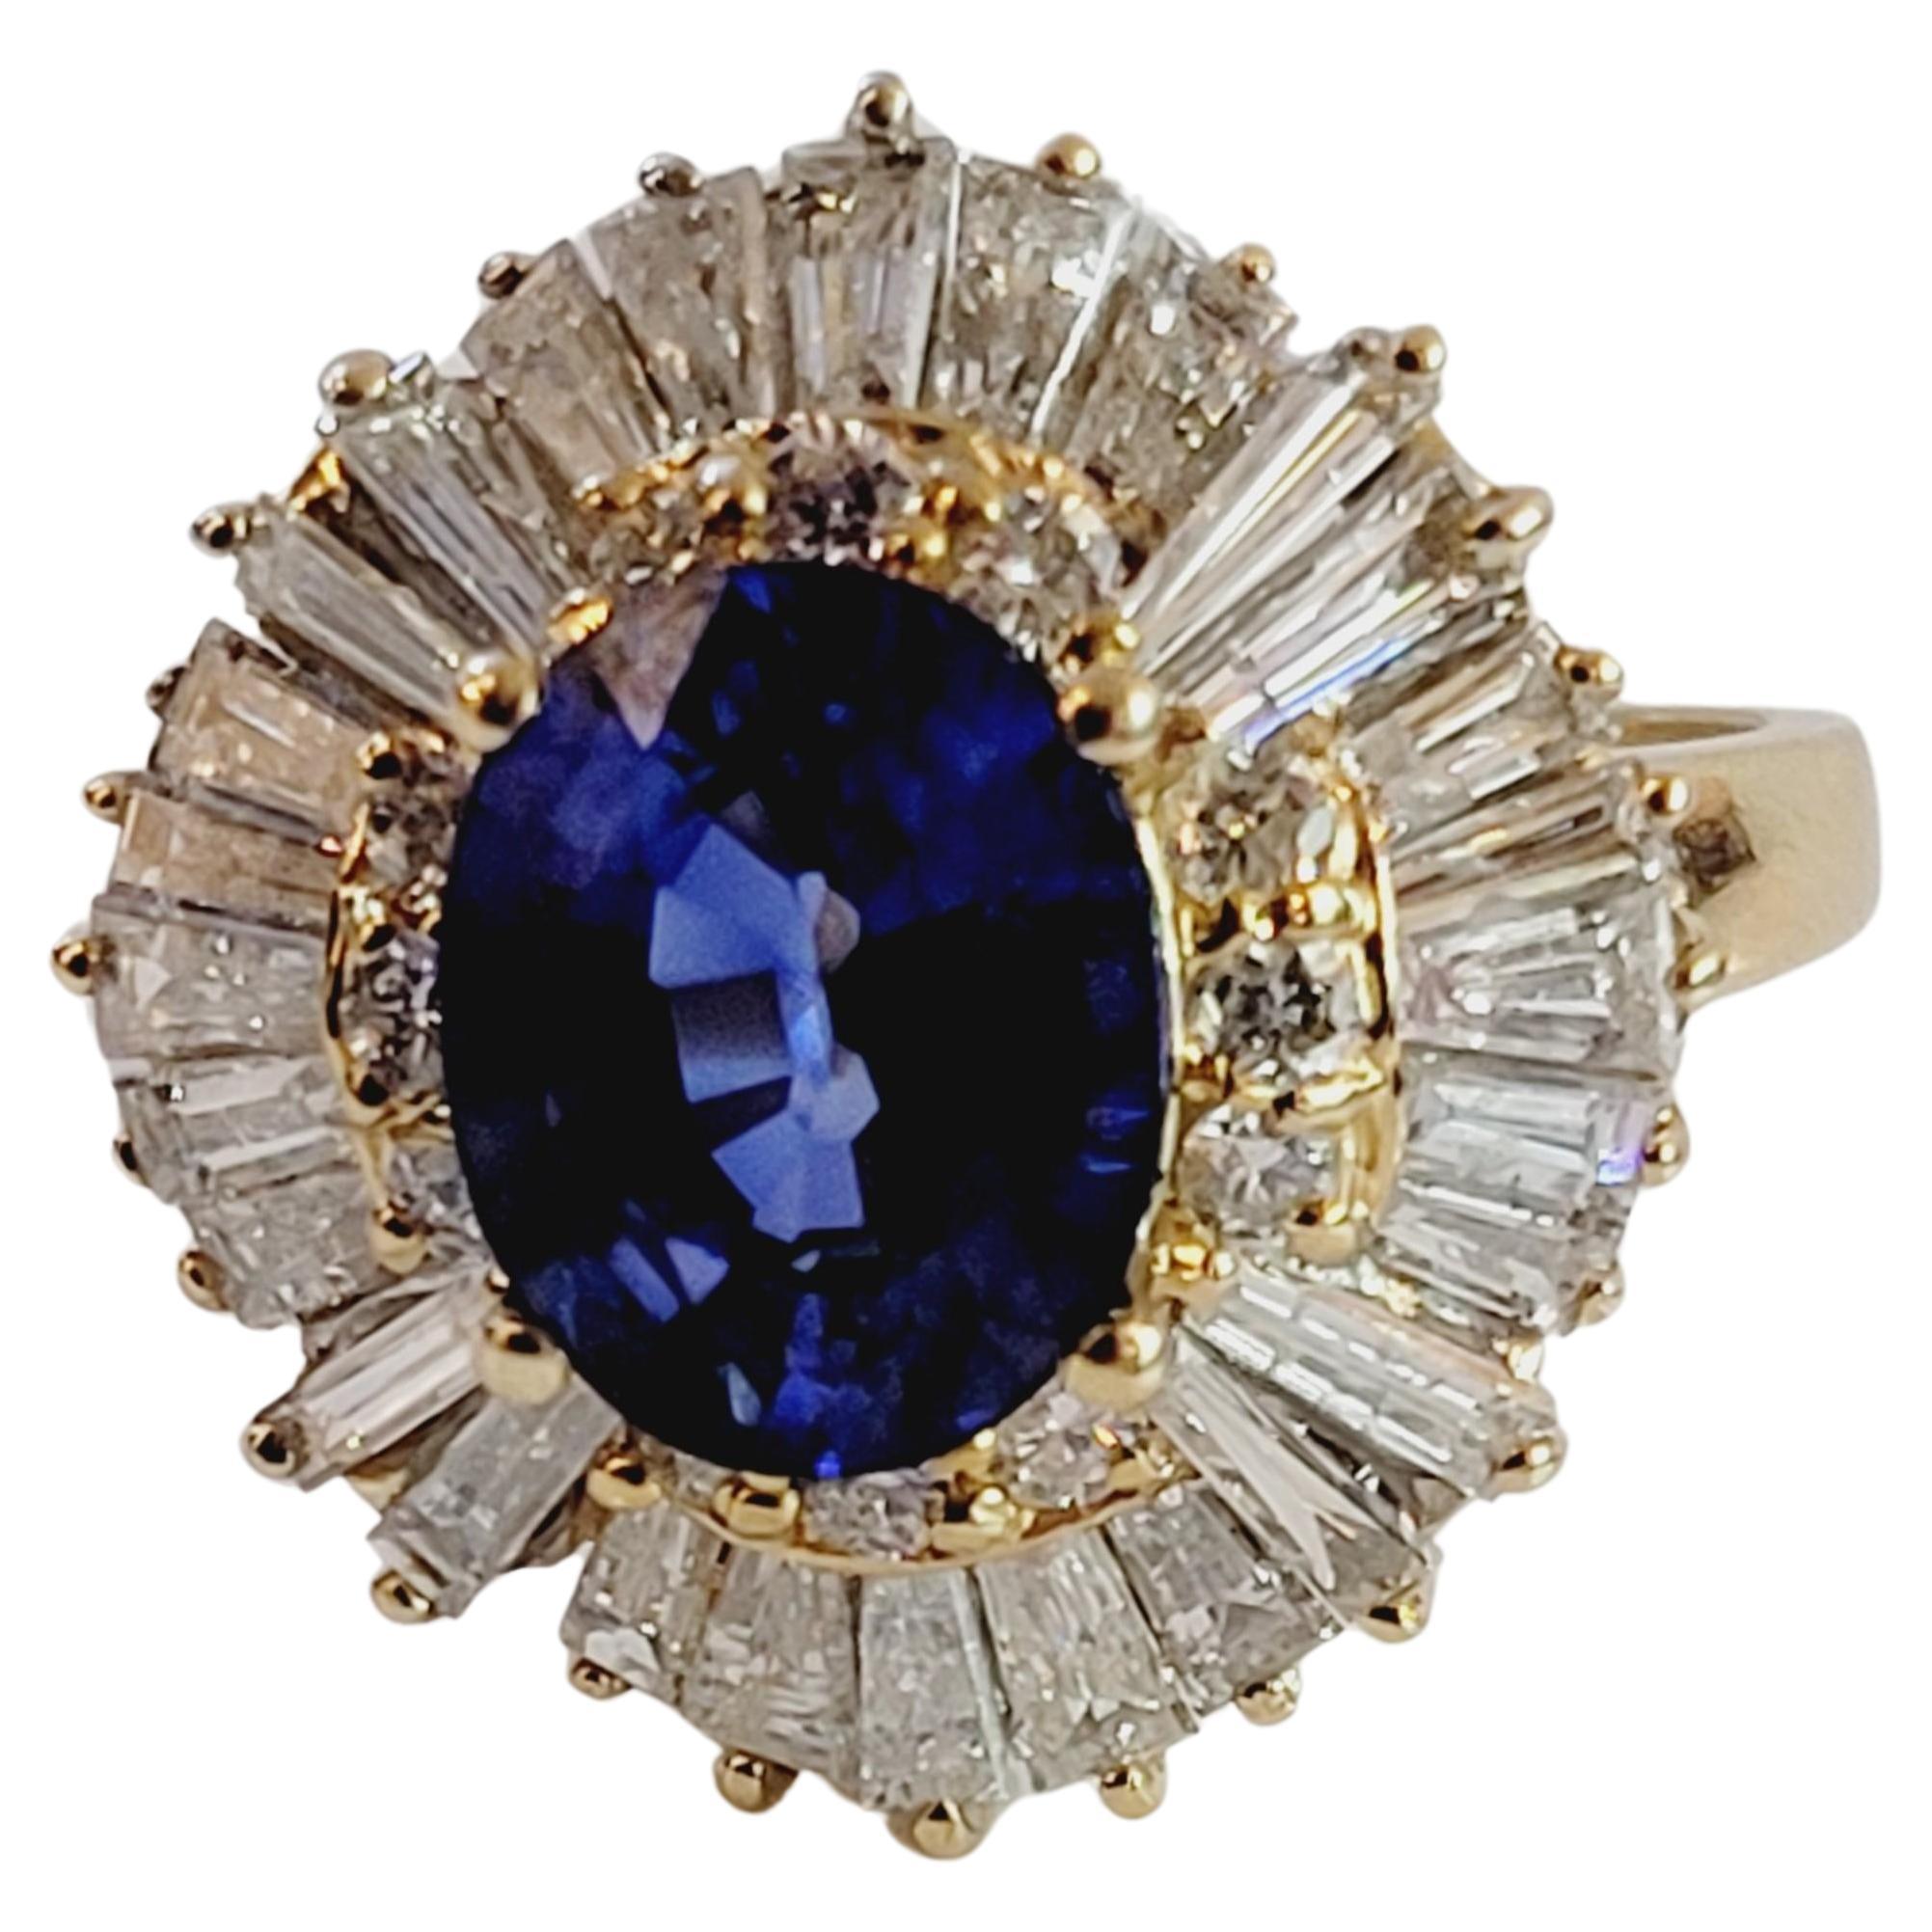 14K Yellow Gold Ballerina Ring with Blue Sapphire Center Stone and Diamonds